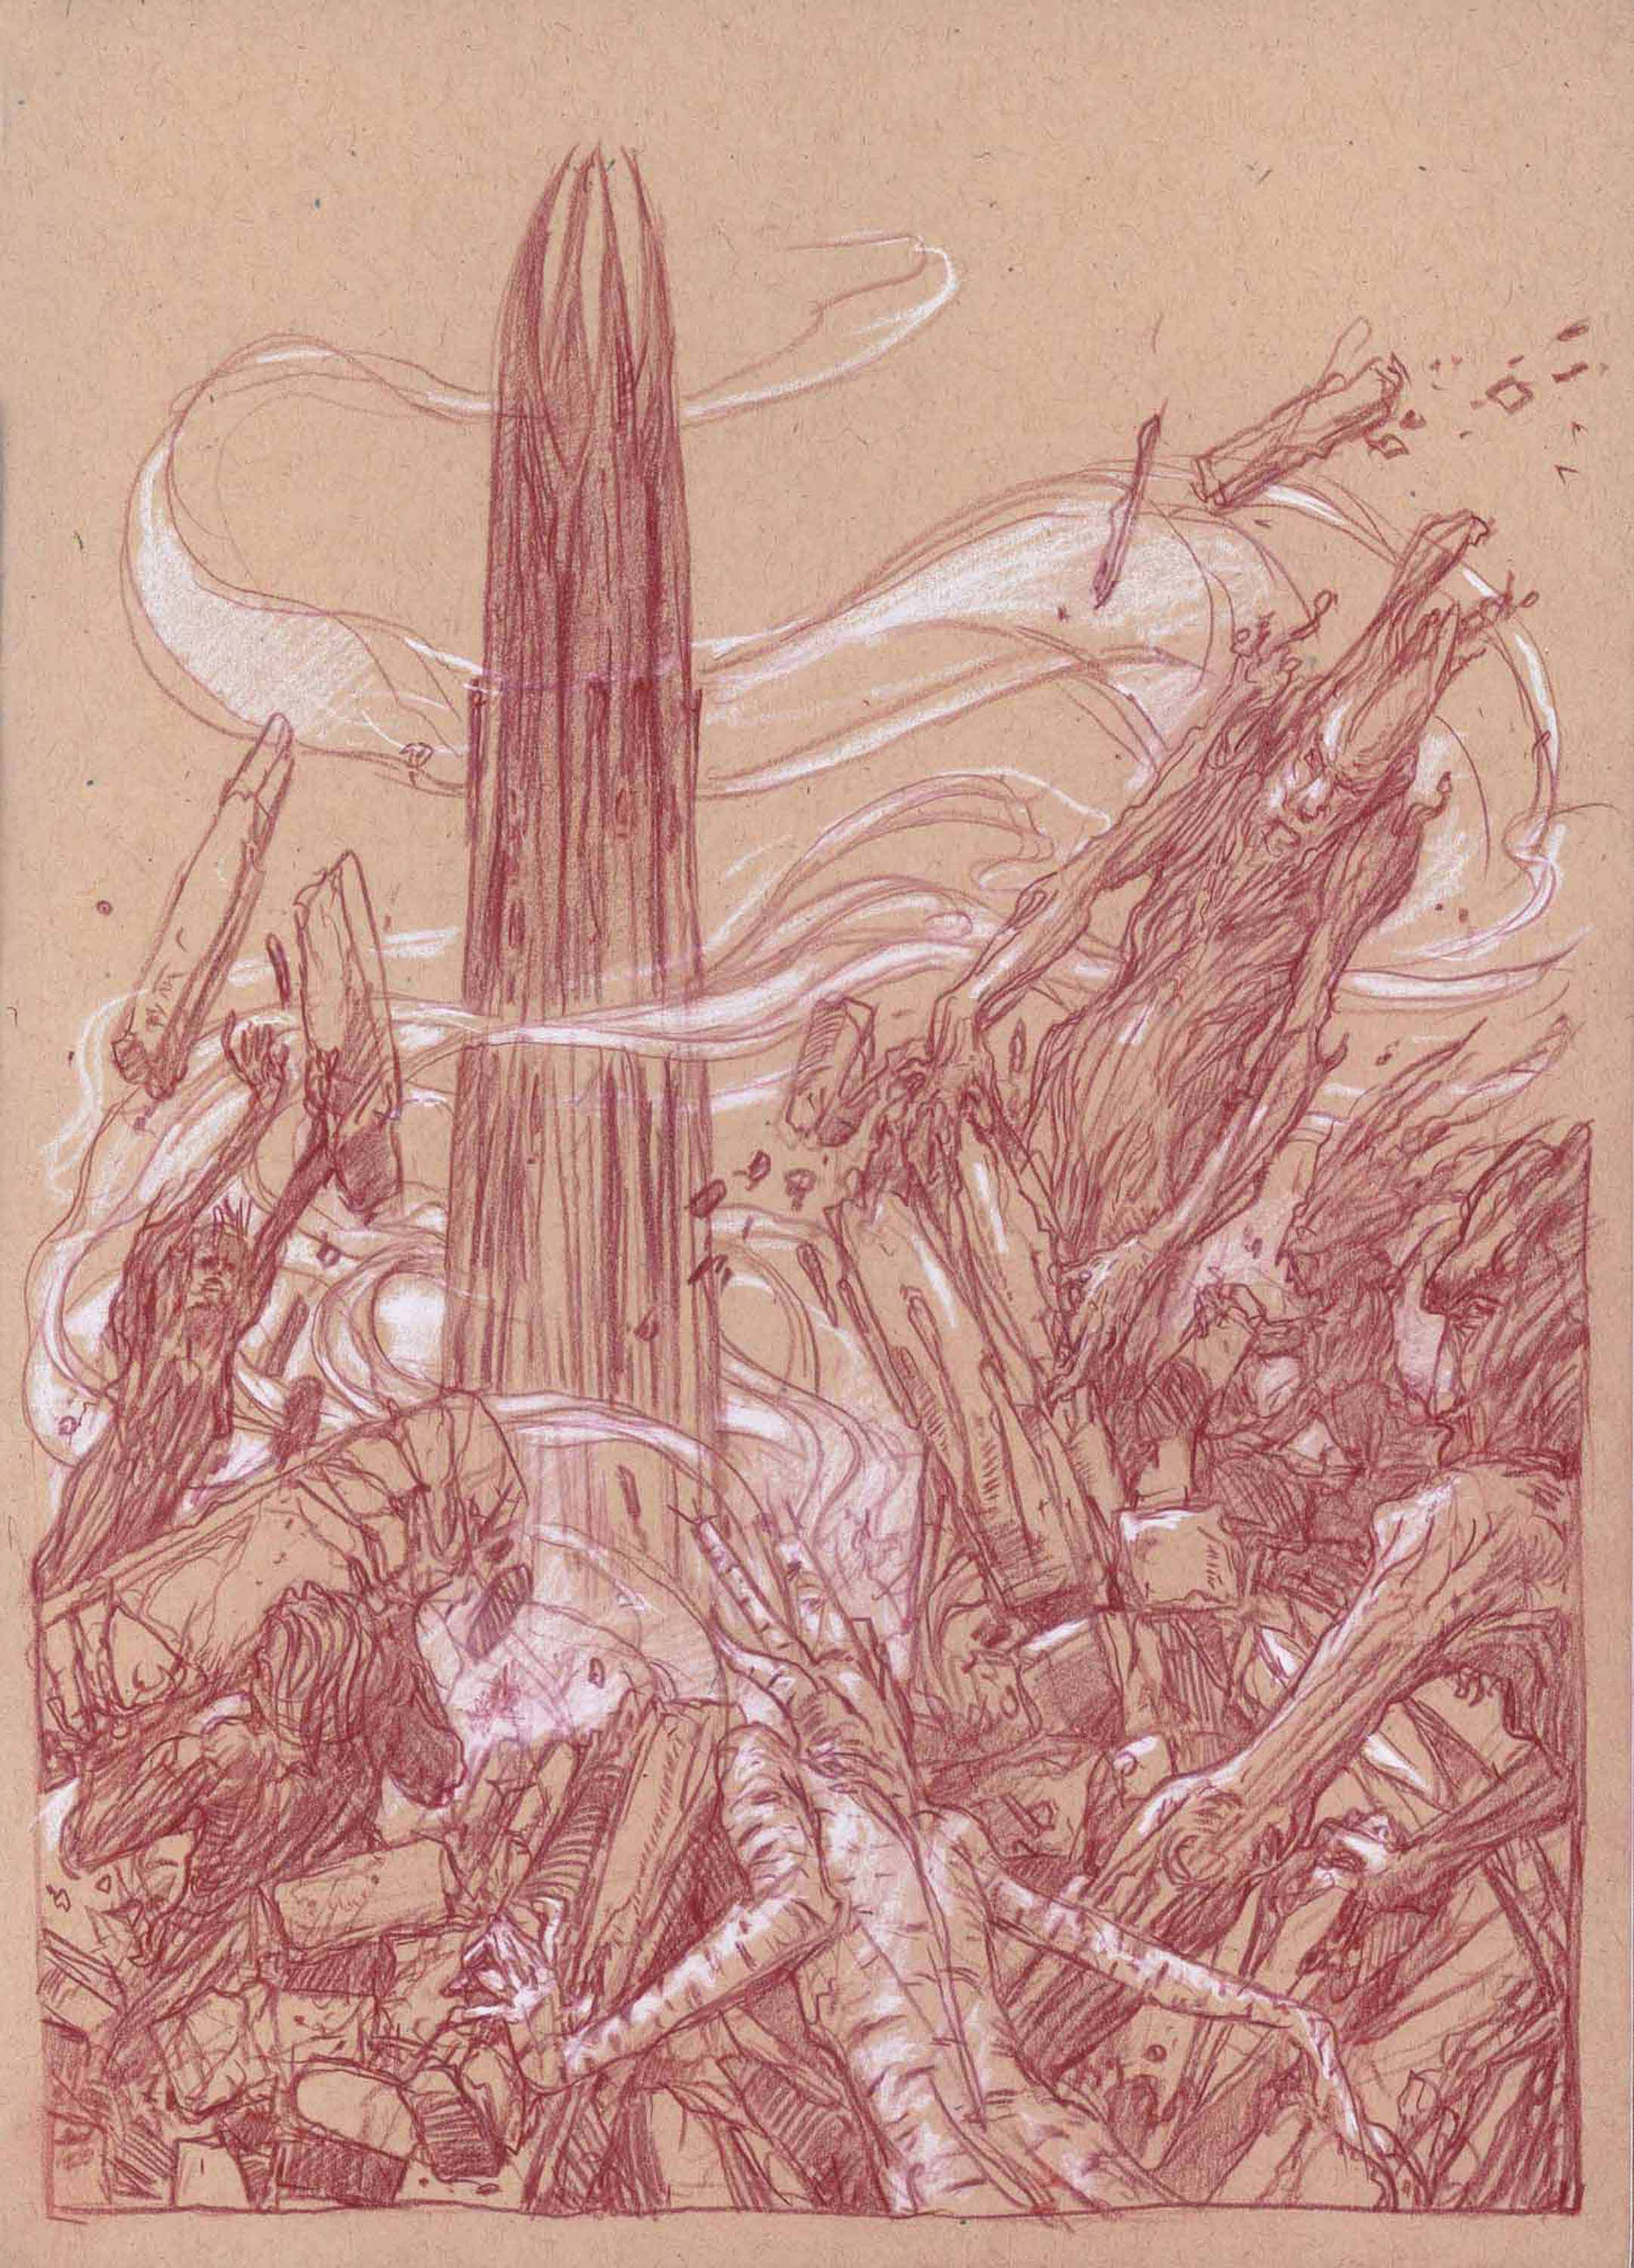 Ents Roused!
11" x 8"  Watercolor Pencil and Chalk on Toned paper 2012
private collection